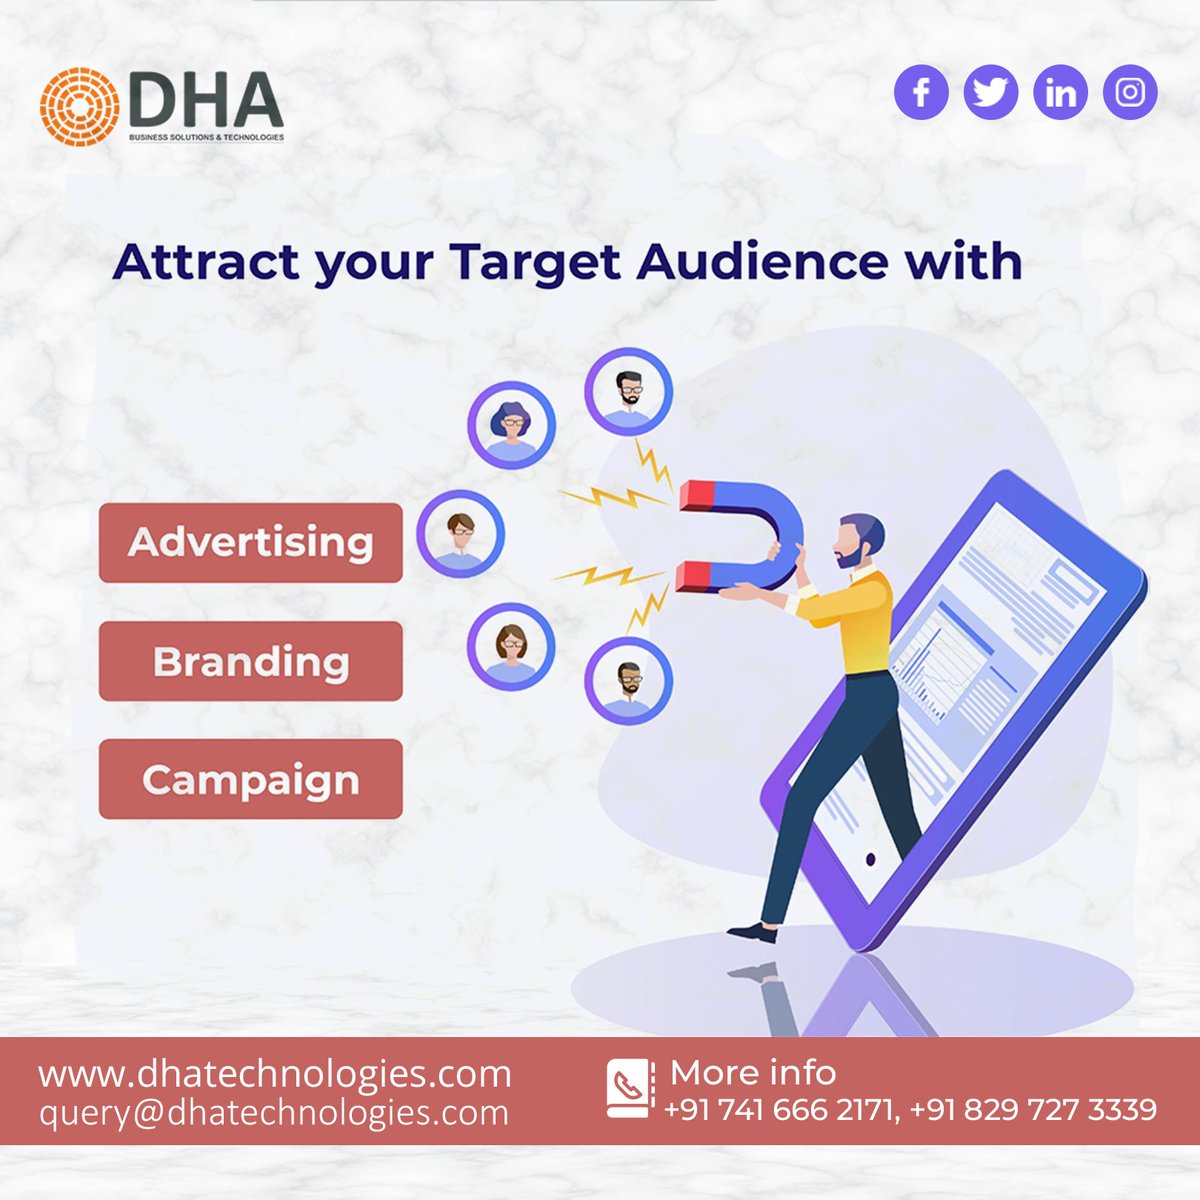 Are you ready to skyrocket your business to new heights?

For enquiries call us at 7416662171

#PPCManagement #DigitalAdvertising #PayPerClick #OnlineMarketing #PPCServices #DigitalCampaigns #PPCAdvertising #GoogleAds #FacebookAds #SocialMediaAds #AdWords #PPCStrategy